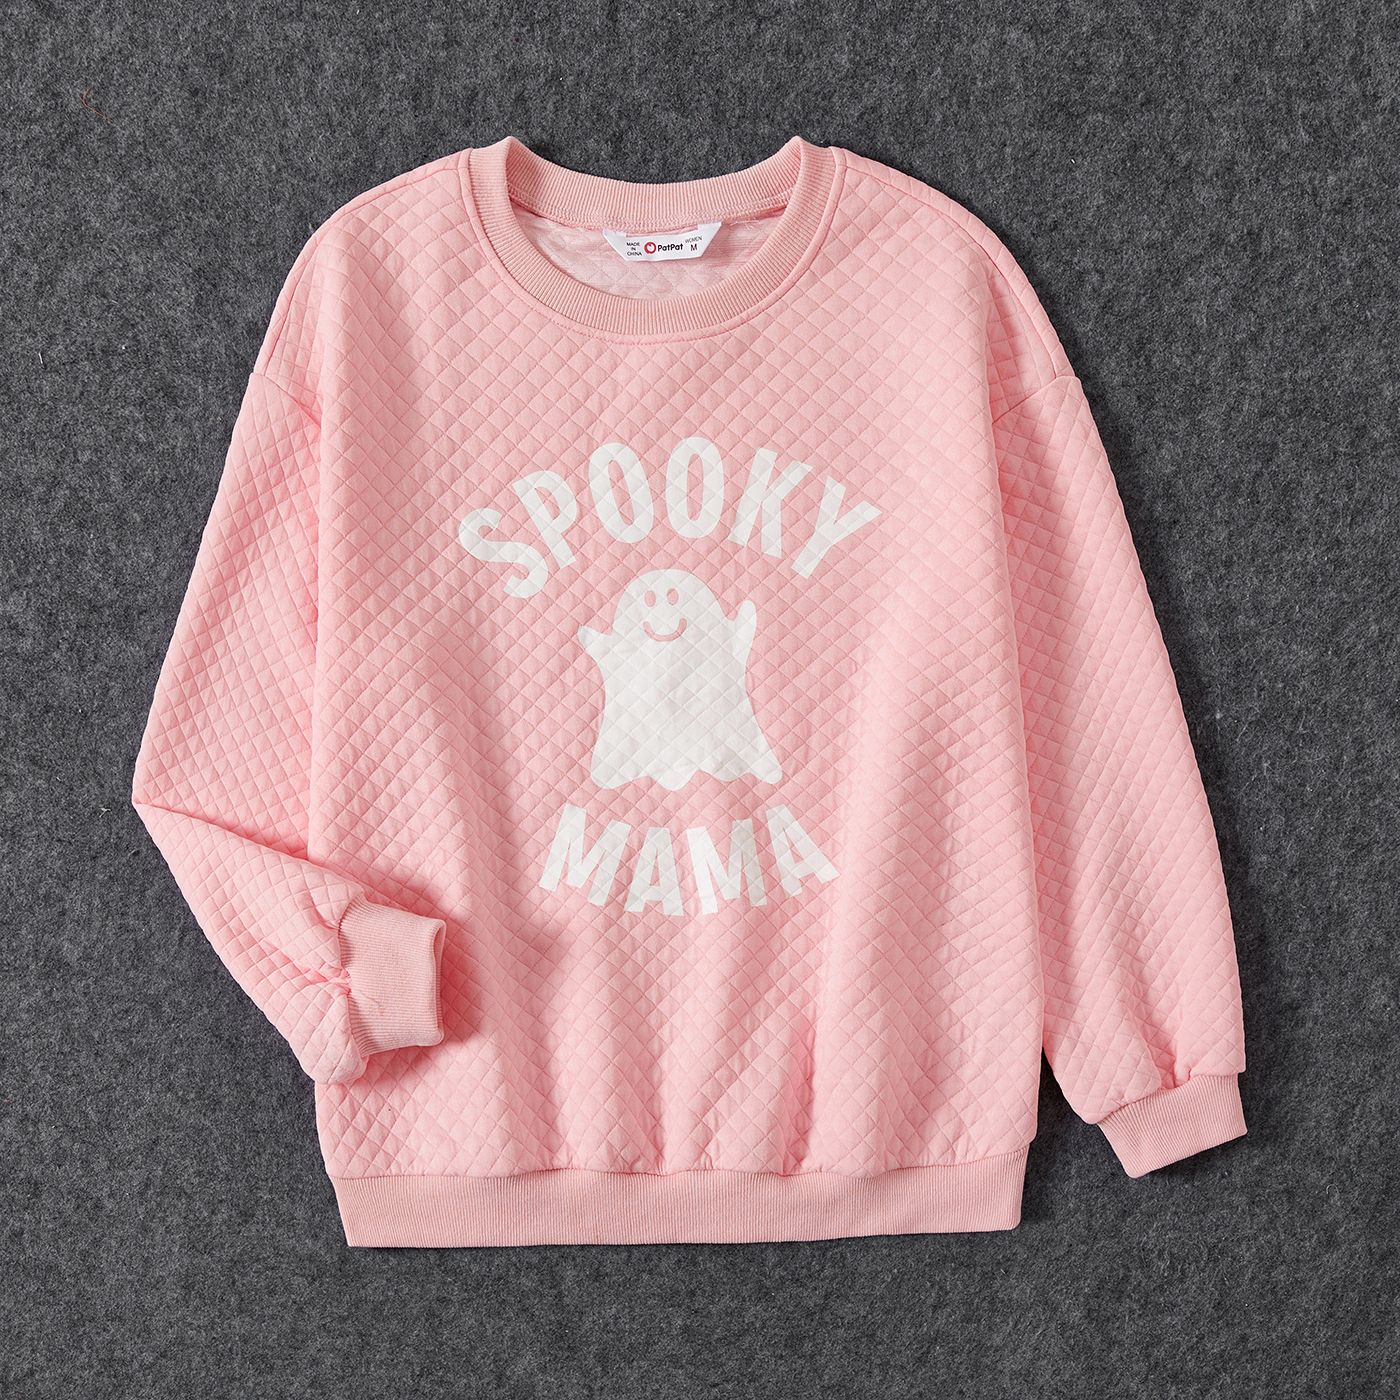 Halloween Family Matching Glow In The Dark Pink Letter & Ghost Print Tops